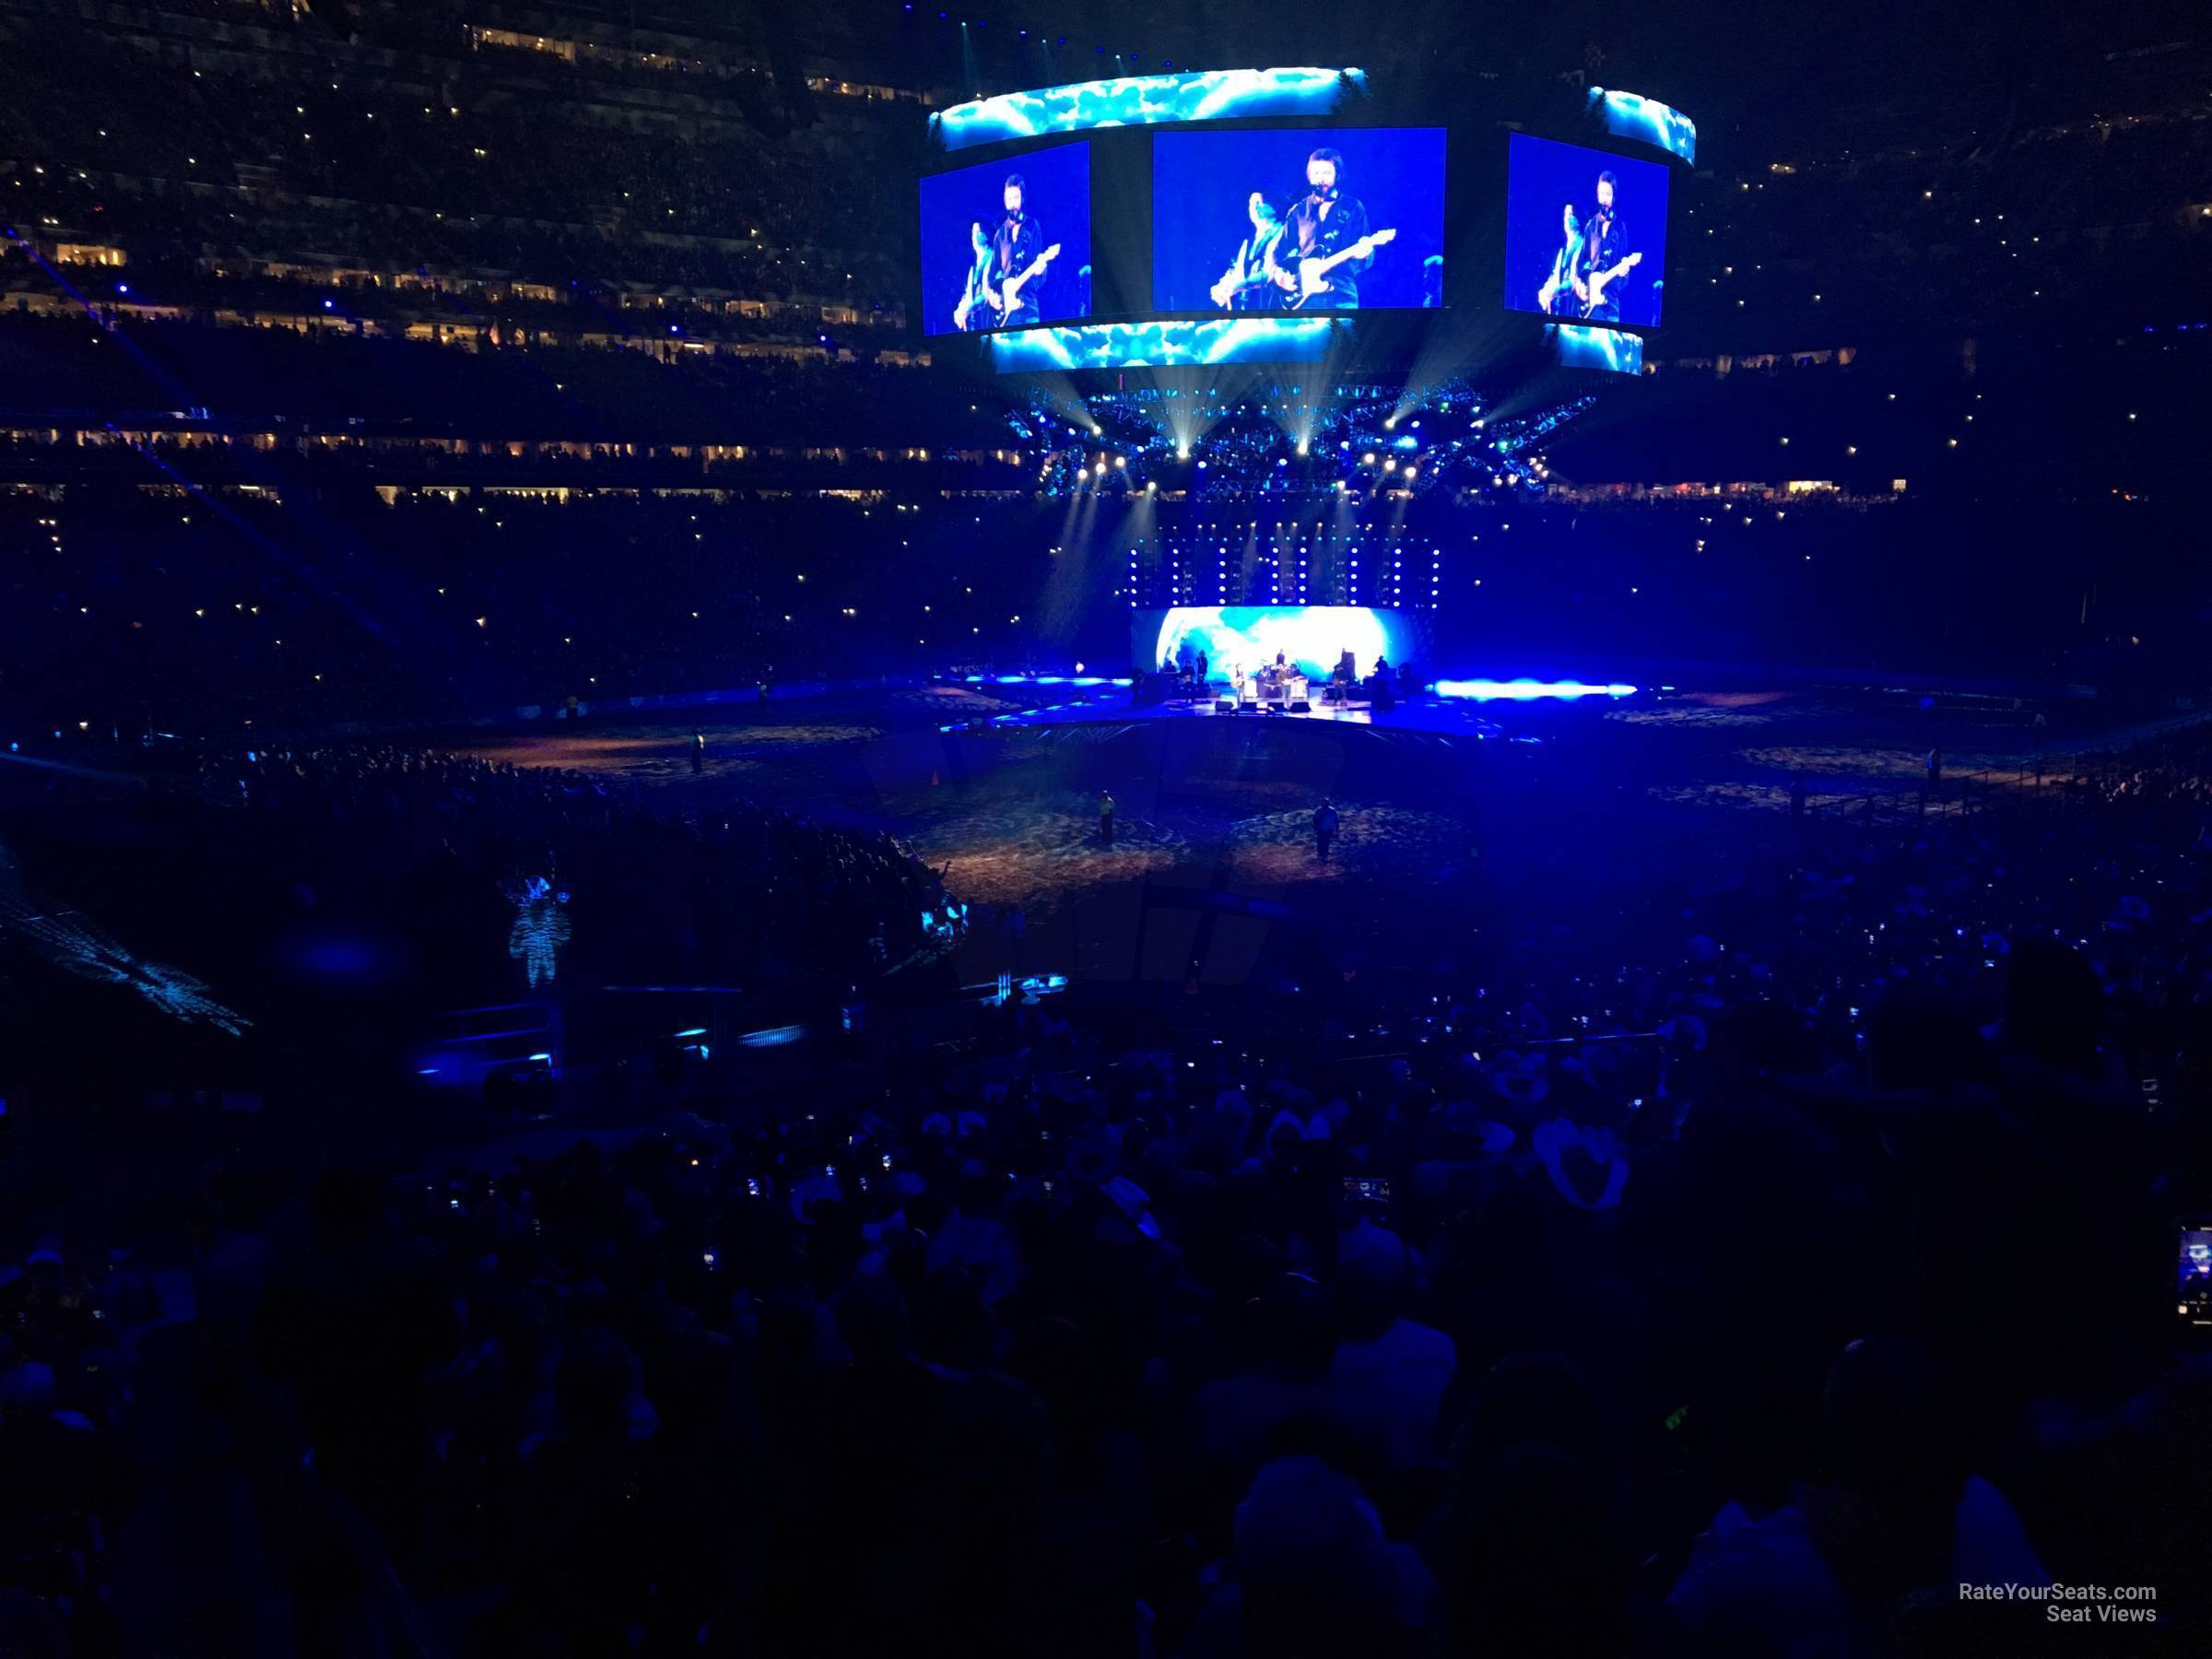 section 112, row hh seat view  for concert - nrg stadium